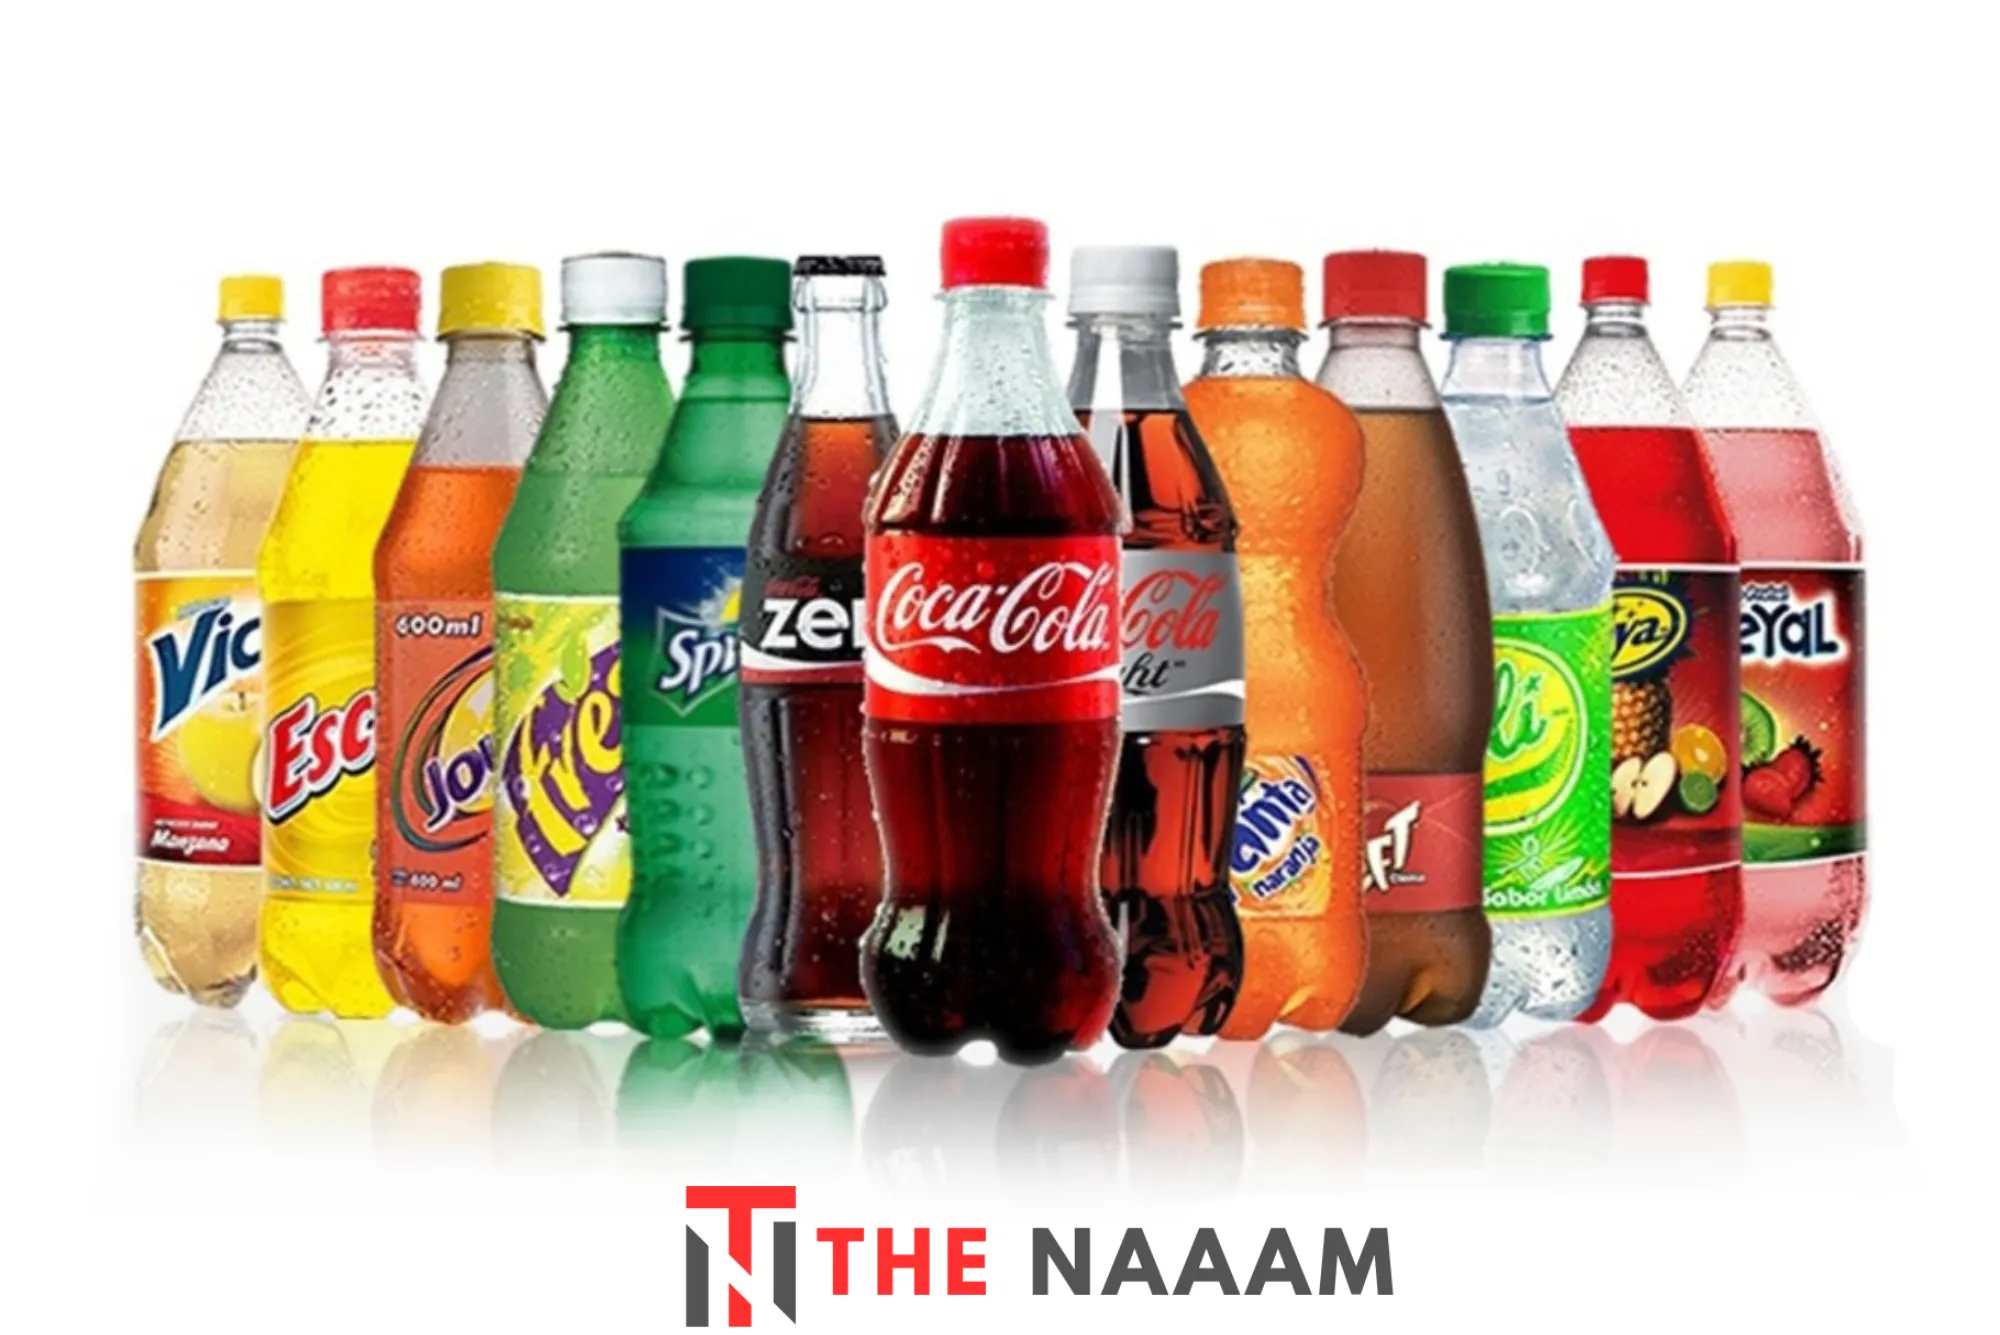 A Market Research Firm Conducts A Survey Of Soft Drinks